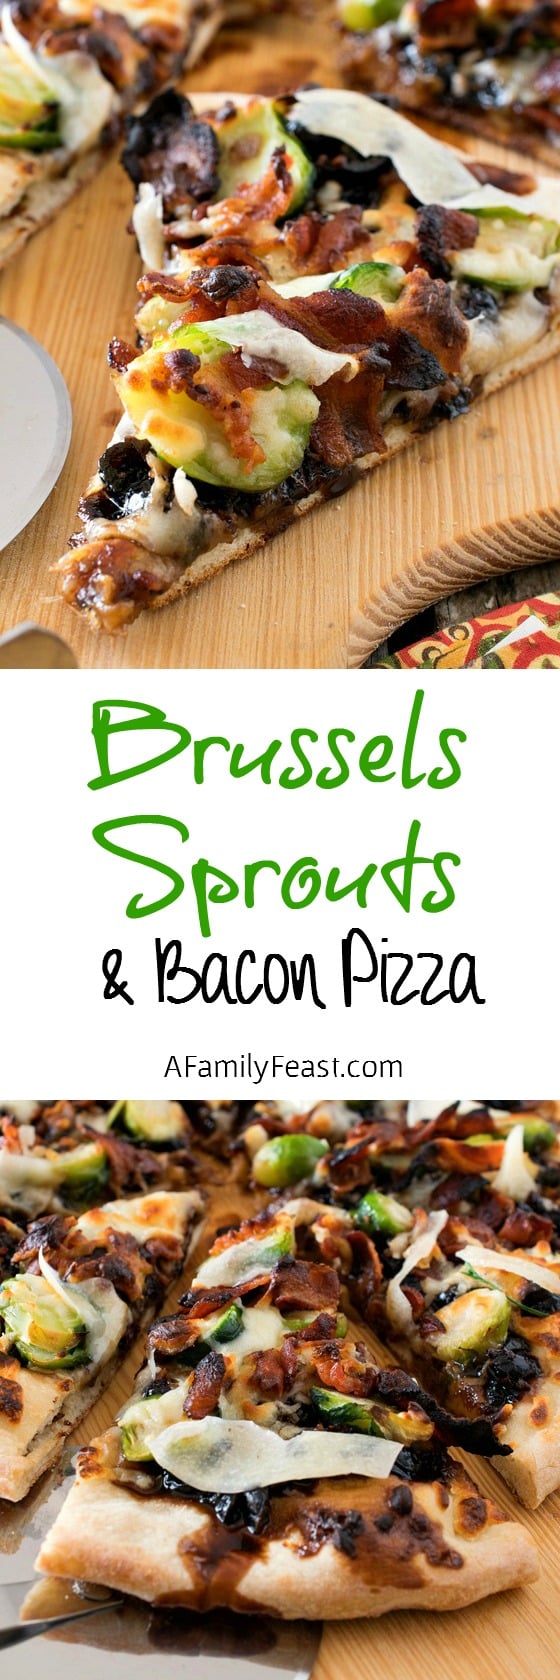 Brussels Sprouts and Bacon Pizza - Such a fantastic flavor combination for a pizza!